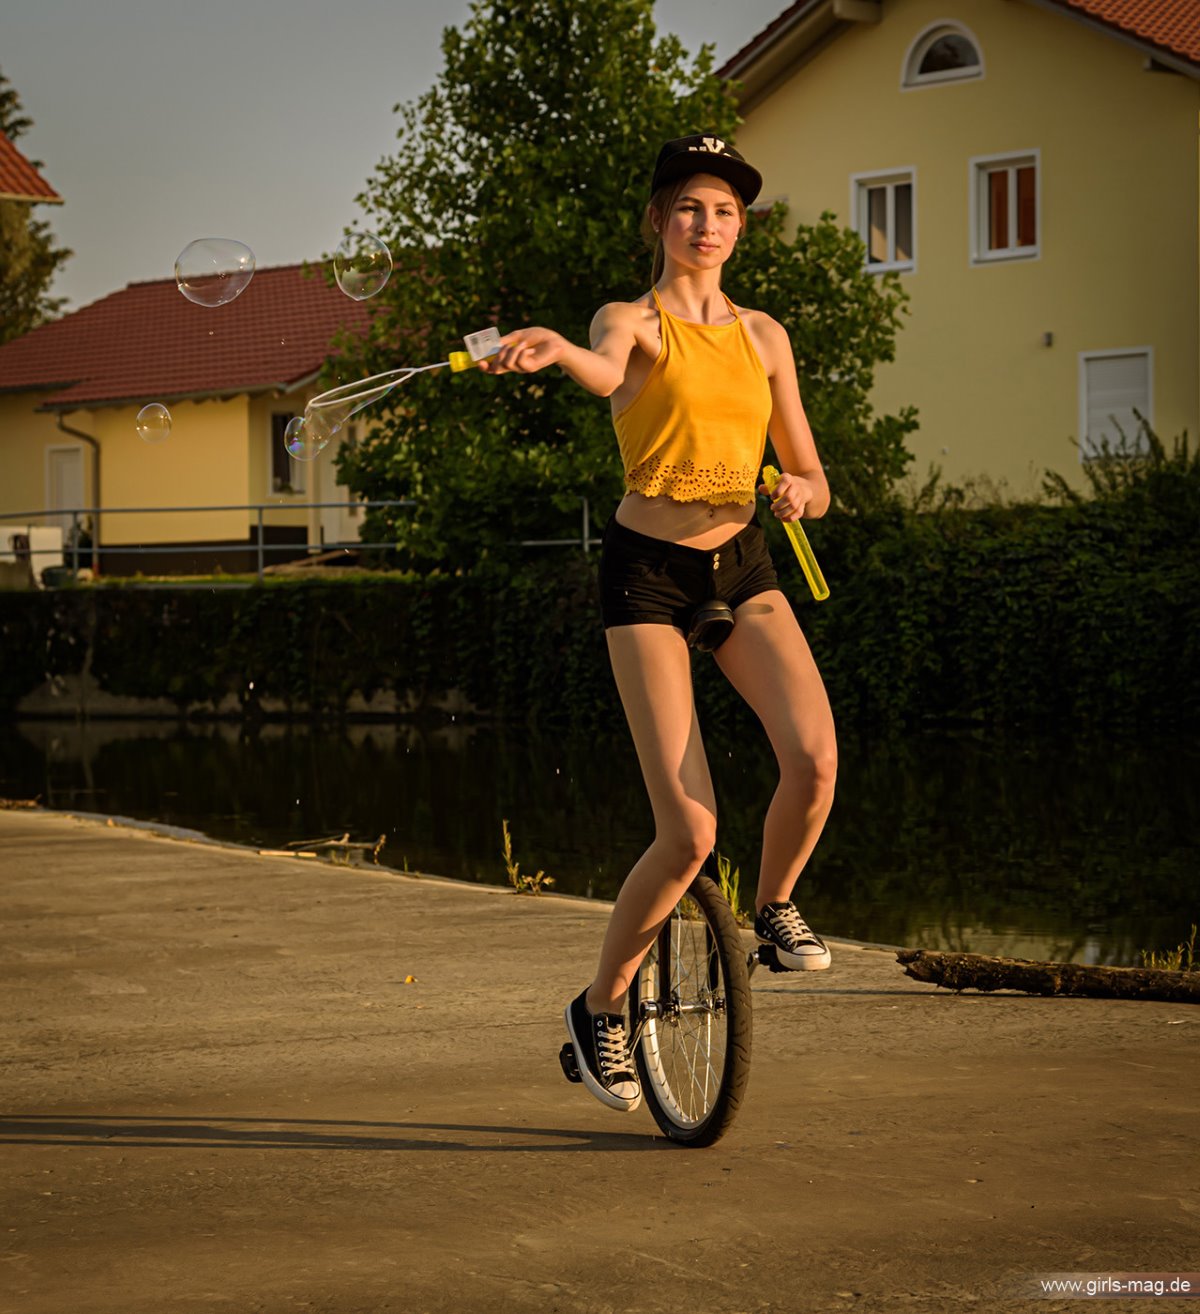 Girls Mag Annika Bubbles on a Unicycle 0104 4417462836.jpg